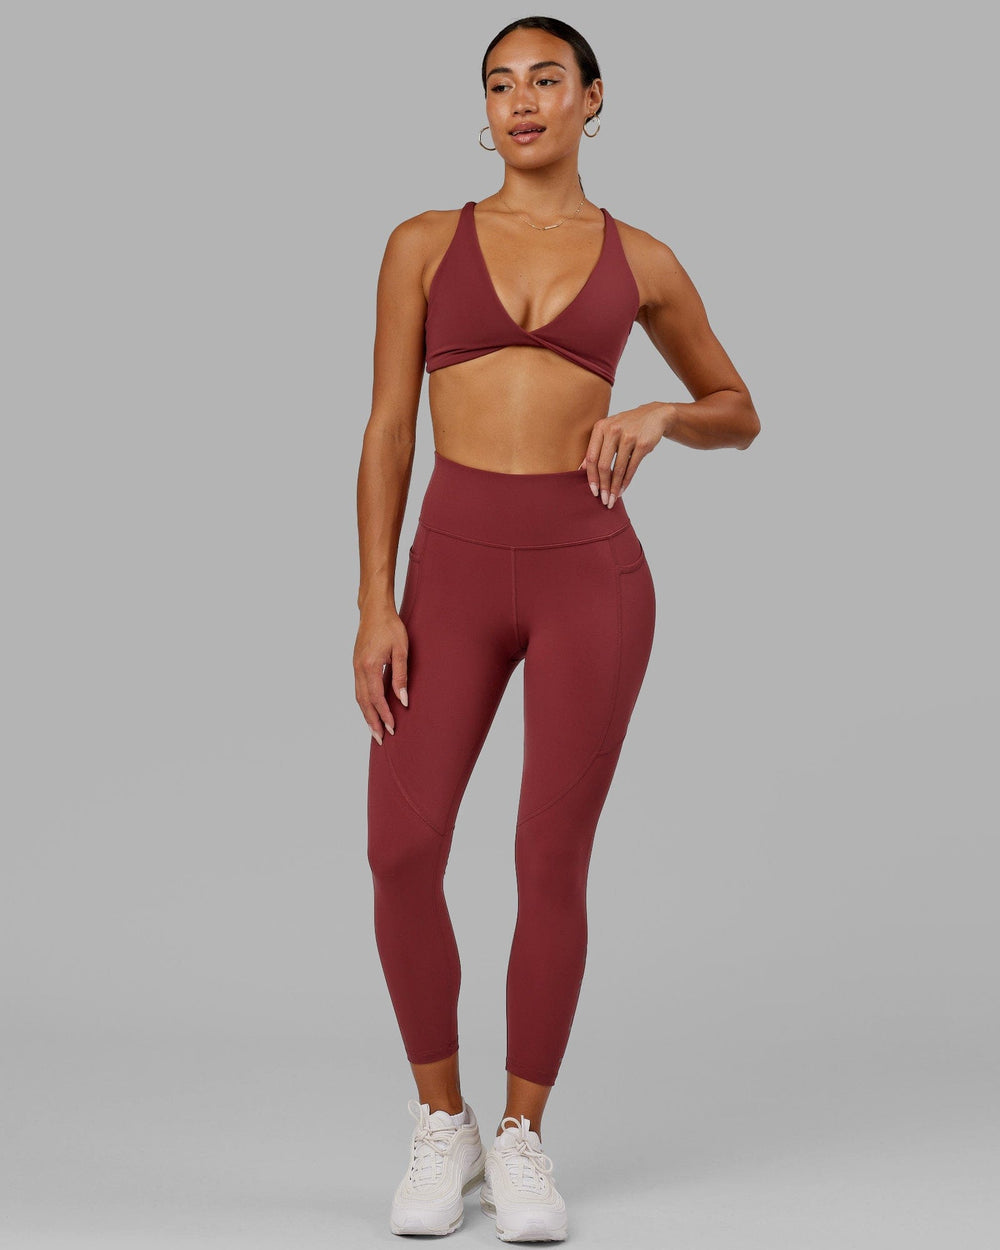 Woman wearing Rep 7/8 Length Tight - Apple Berry